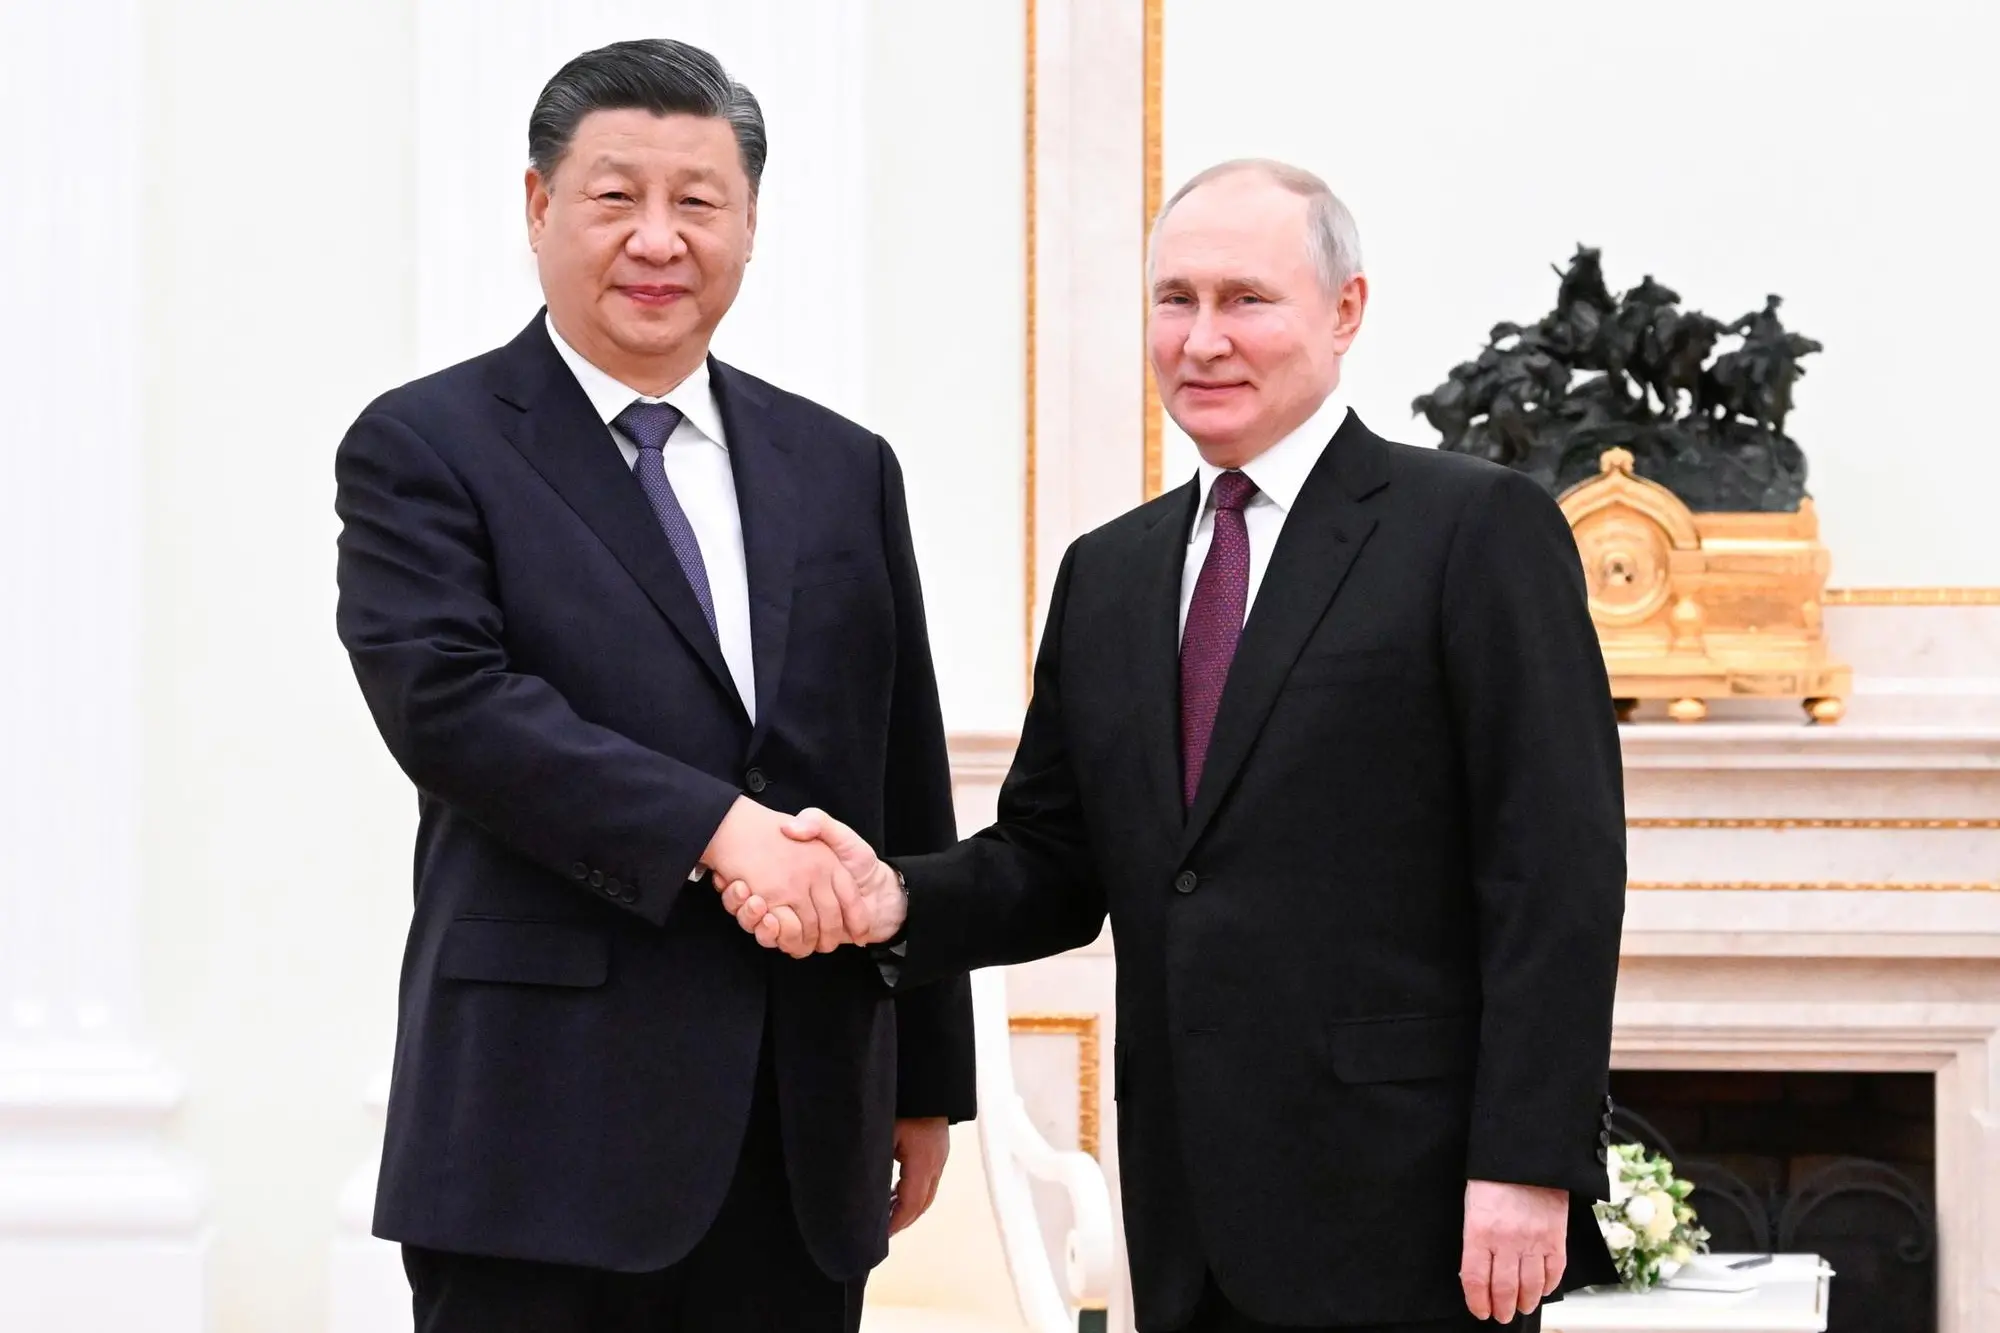 epa10534502 Chinese President Xi Jinping is greeted by Russian President Vladimir Putin at the Kremlin in Moscow, Russia, 20 March 2023. EPA/XINHUA / Shen Hong CHINA OUT / MANDATORY CREDIT EDITORIAL USE ONLY